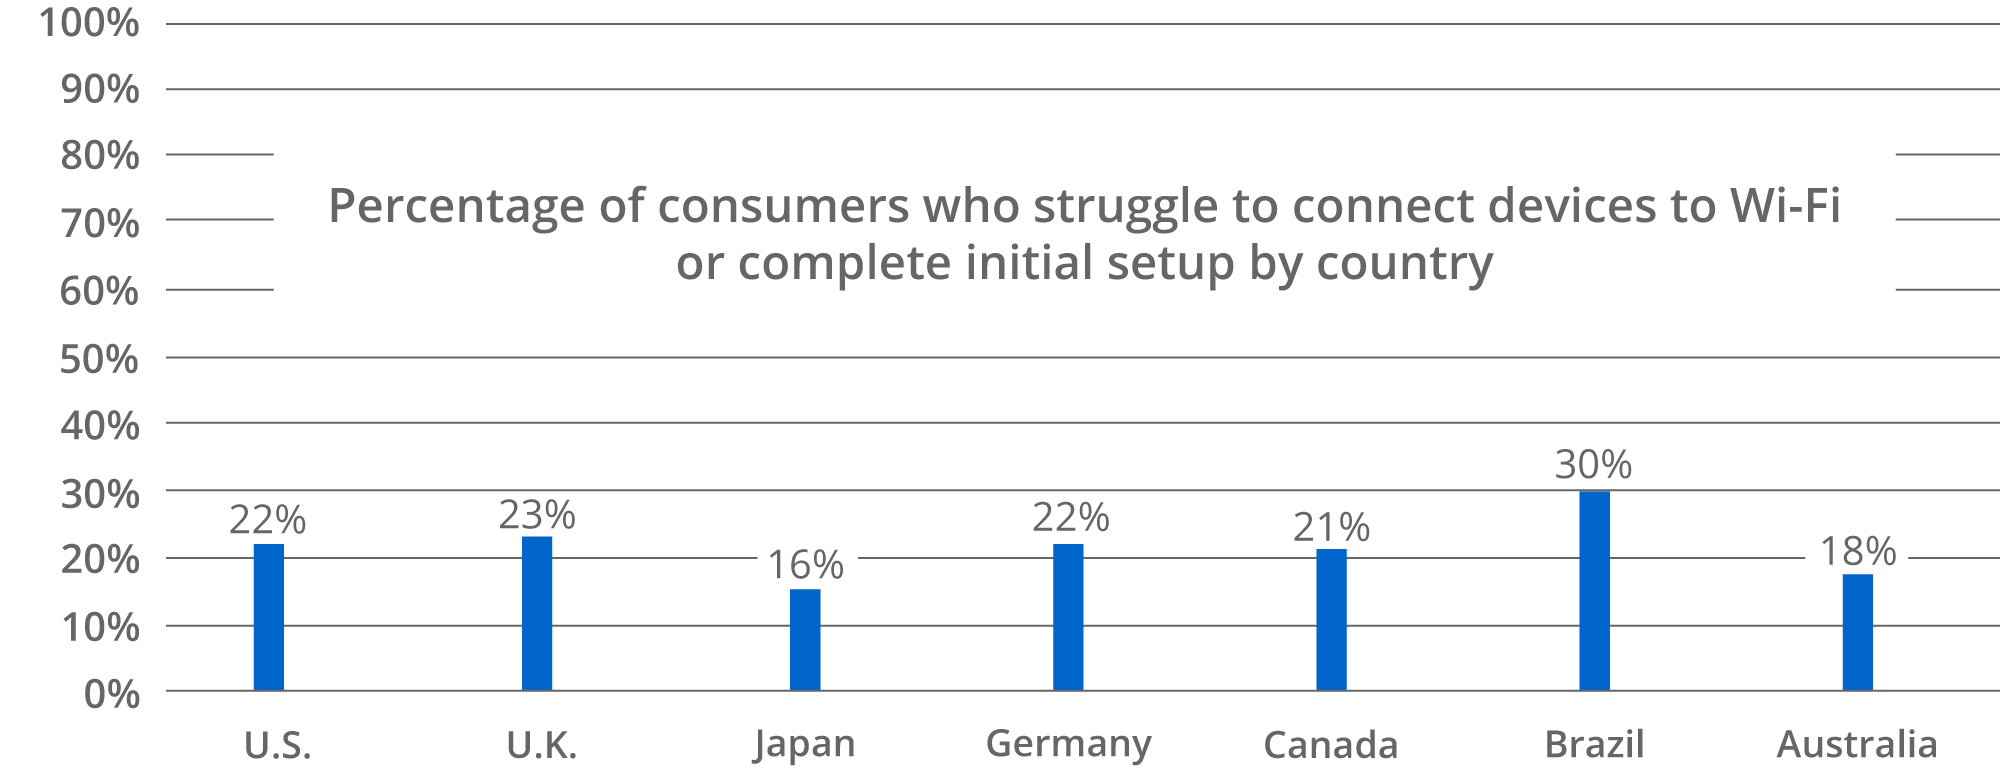 Graph of percentage of consumers who struggle to setup or connect devices to Wi-Fi